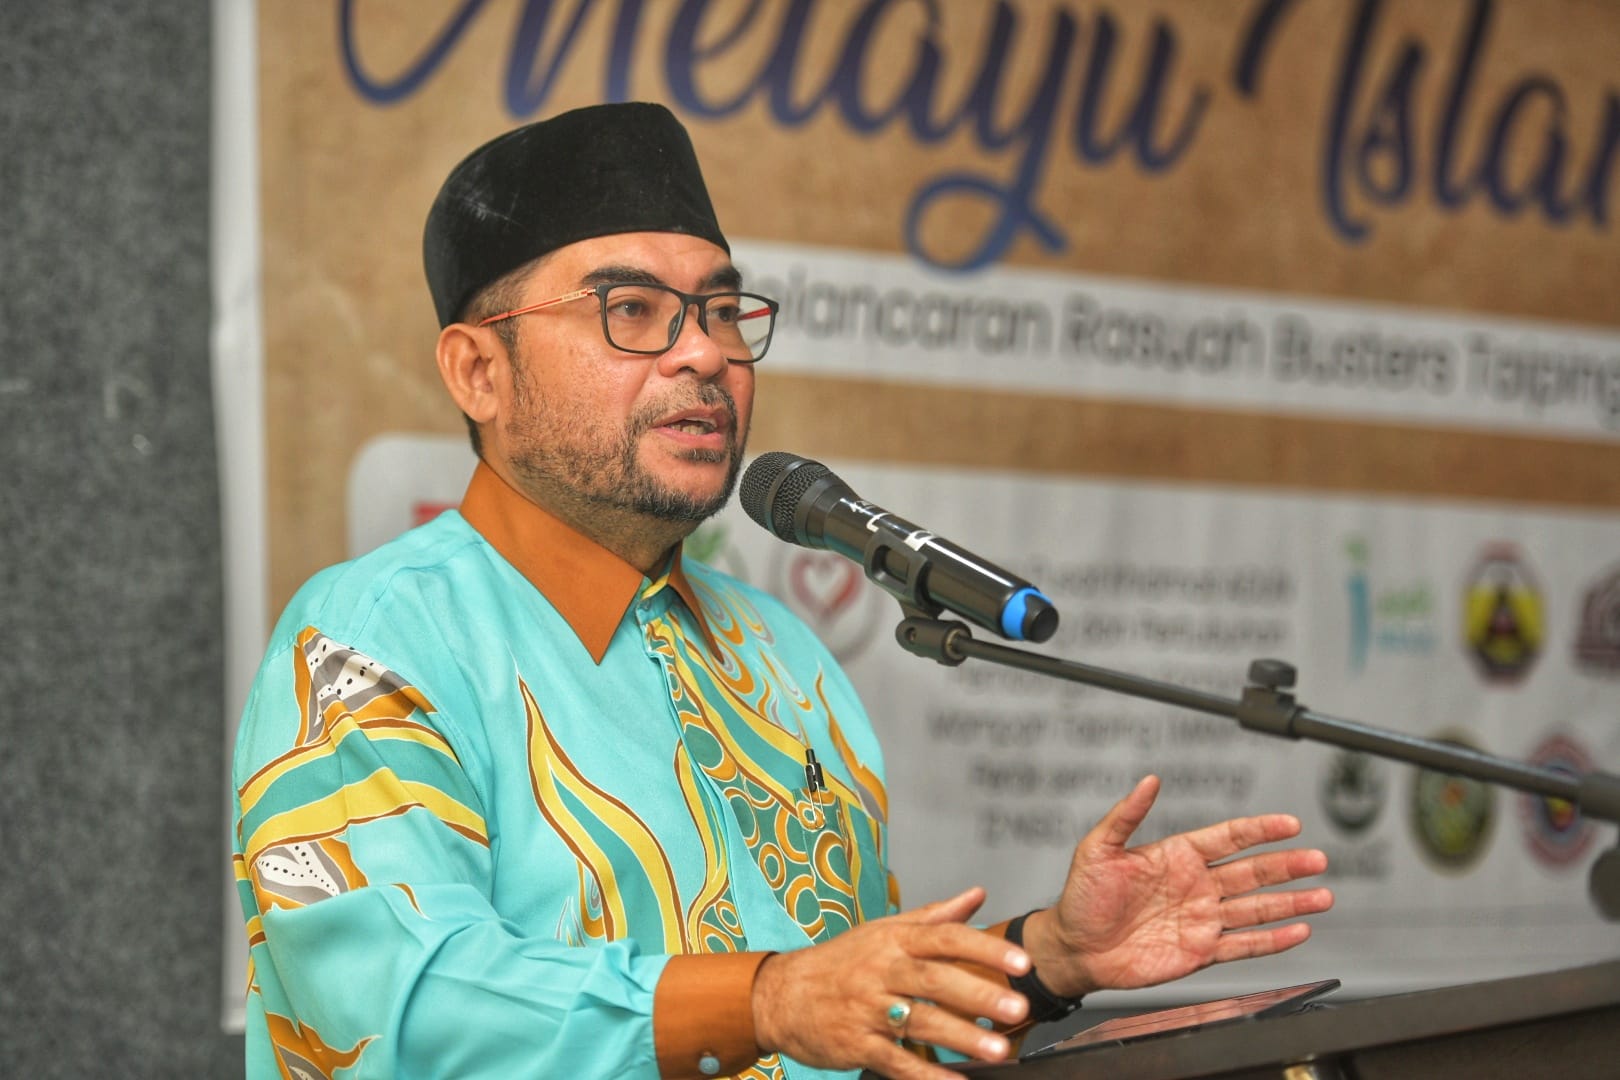 There is no infighting in Amanah, delegates will decide election: Mujahid